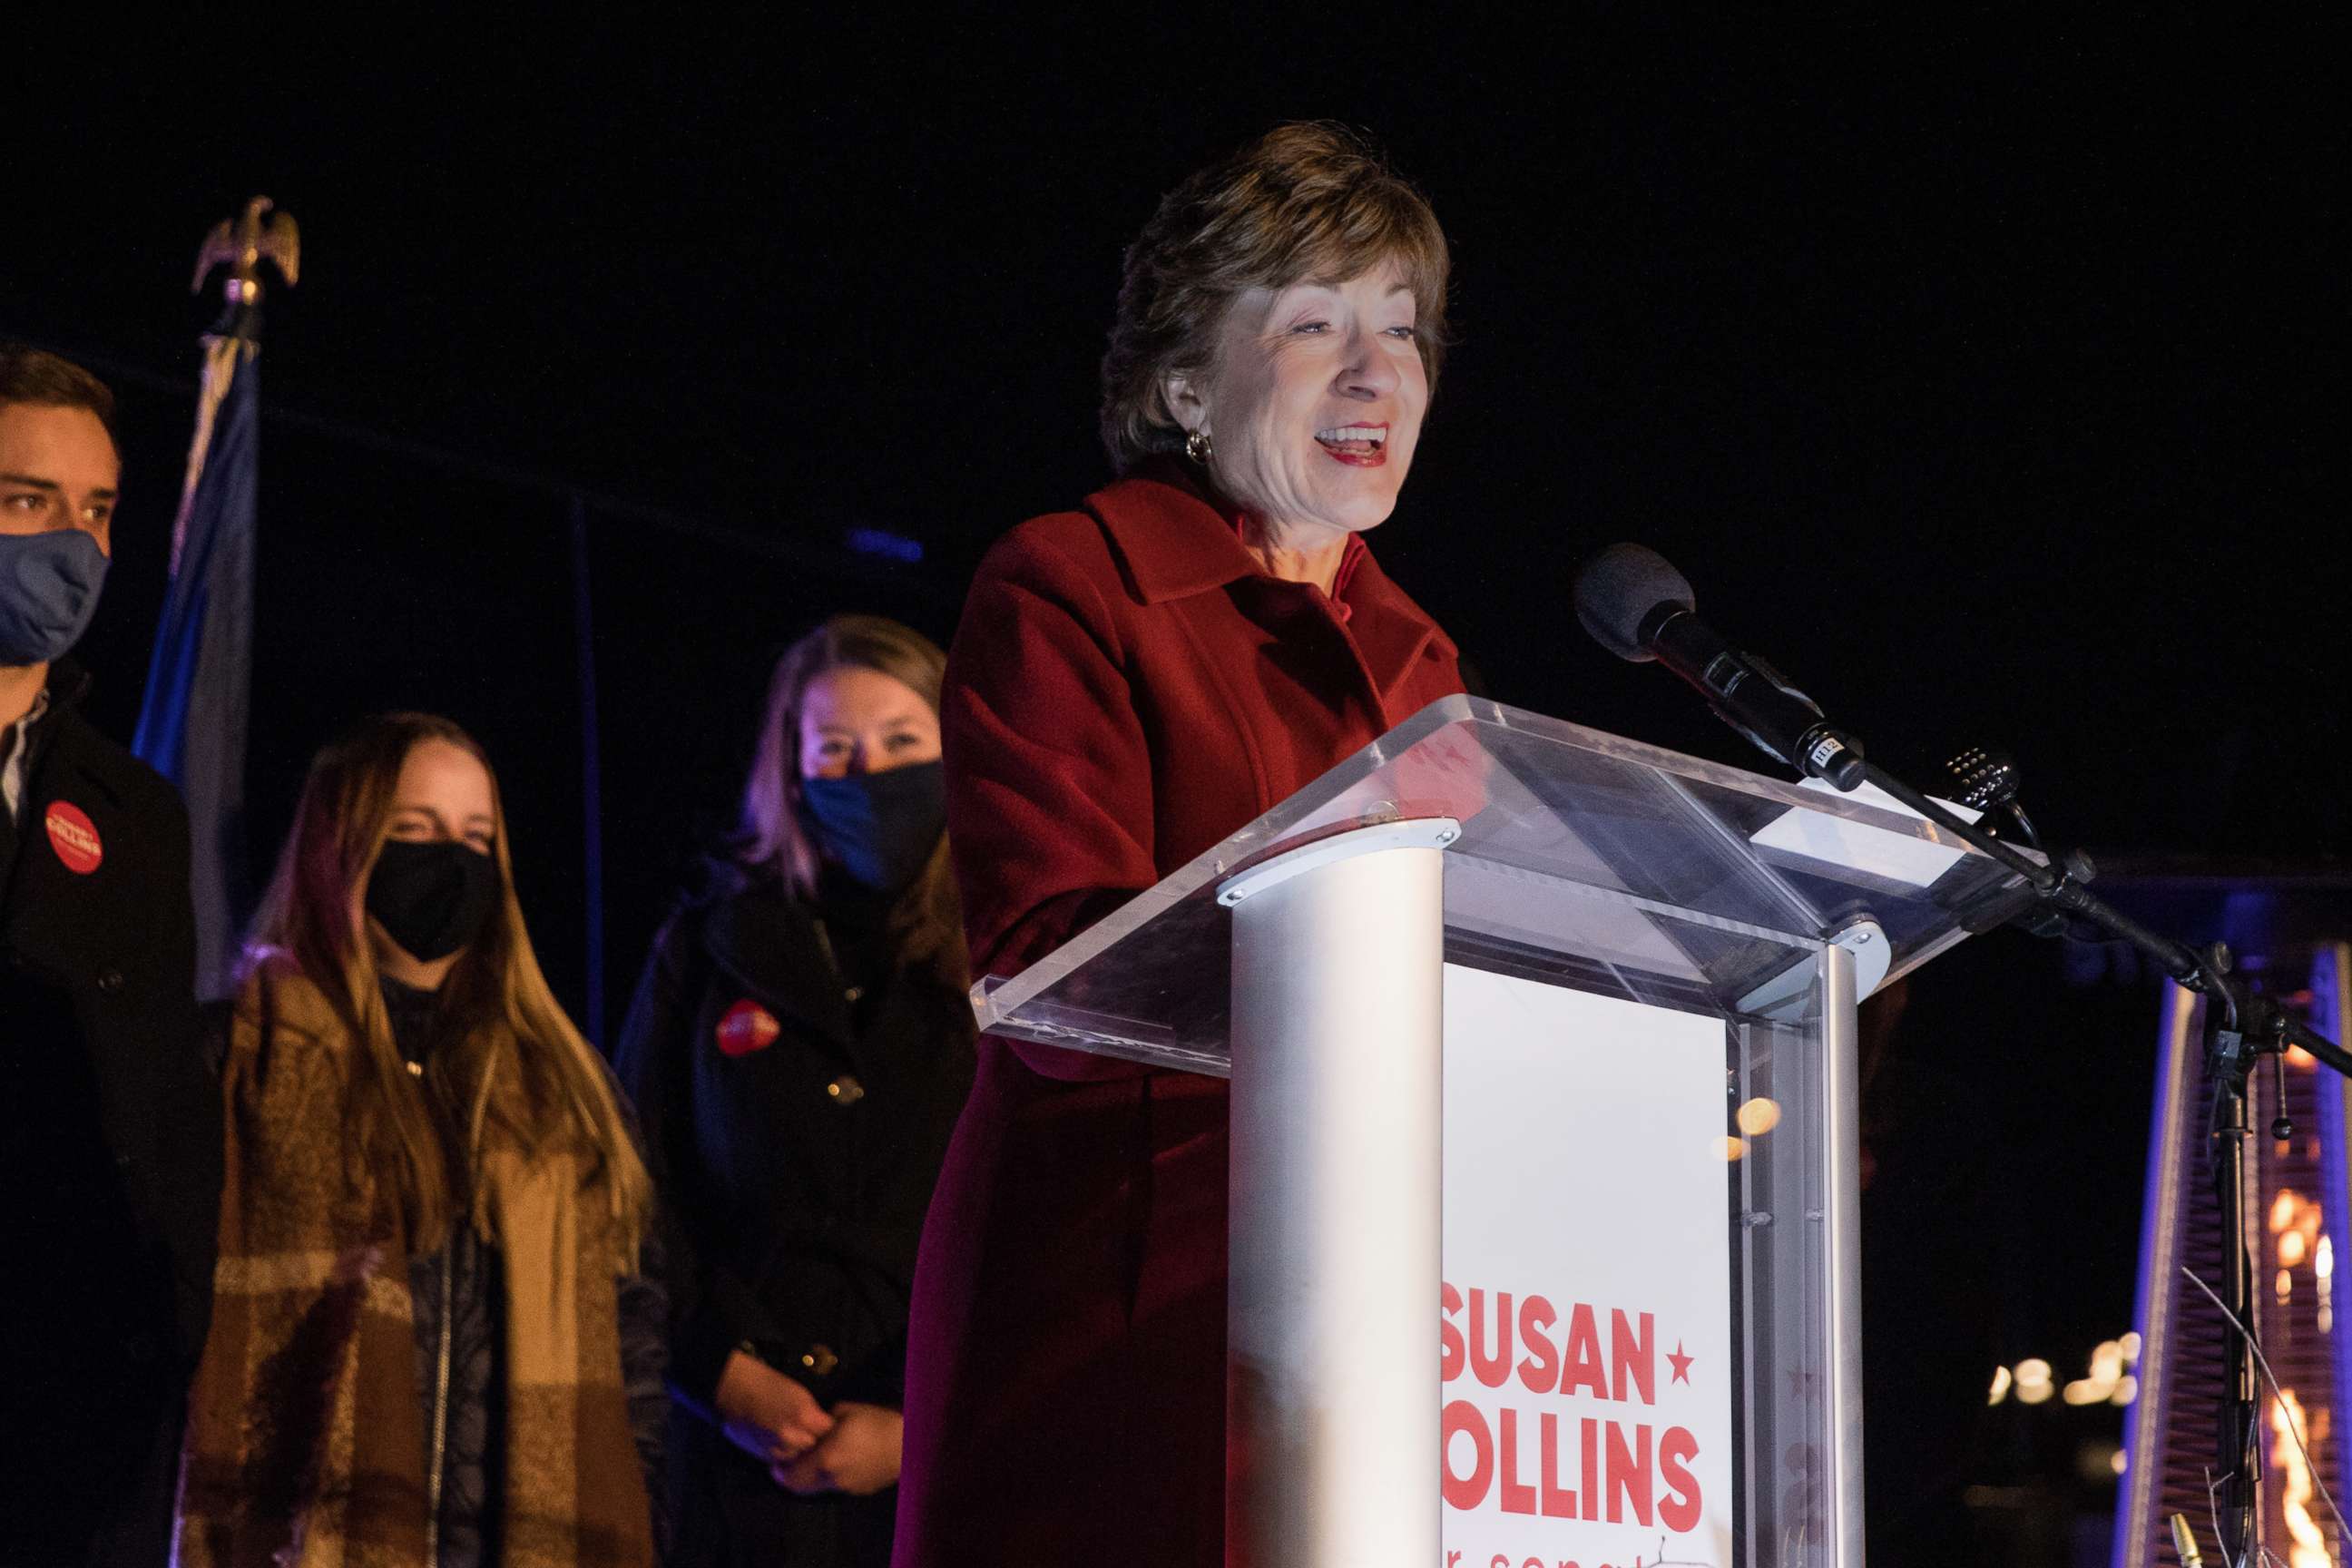 PHOTO: Sen. Susan Collins delivers election night remarks to supporters and staff on Nov. 3, 2020 in Bangor, Maine.